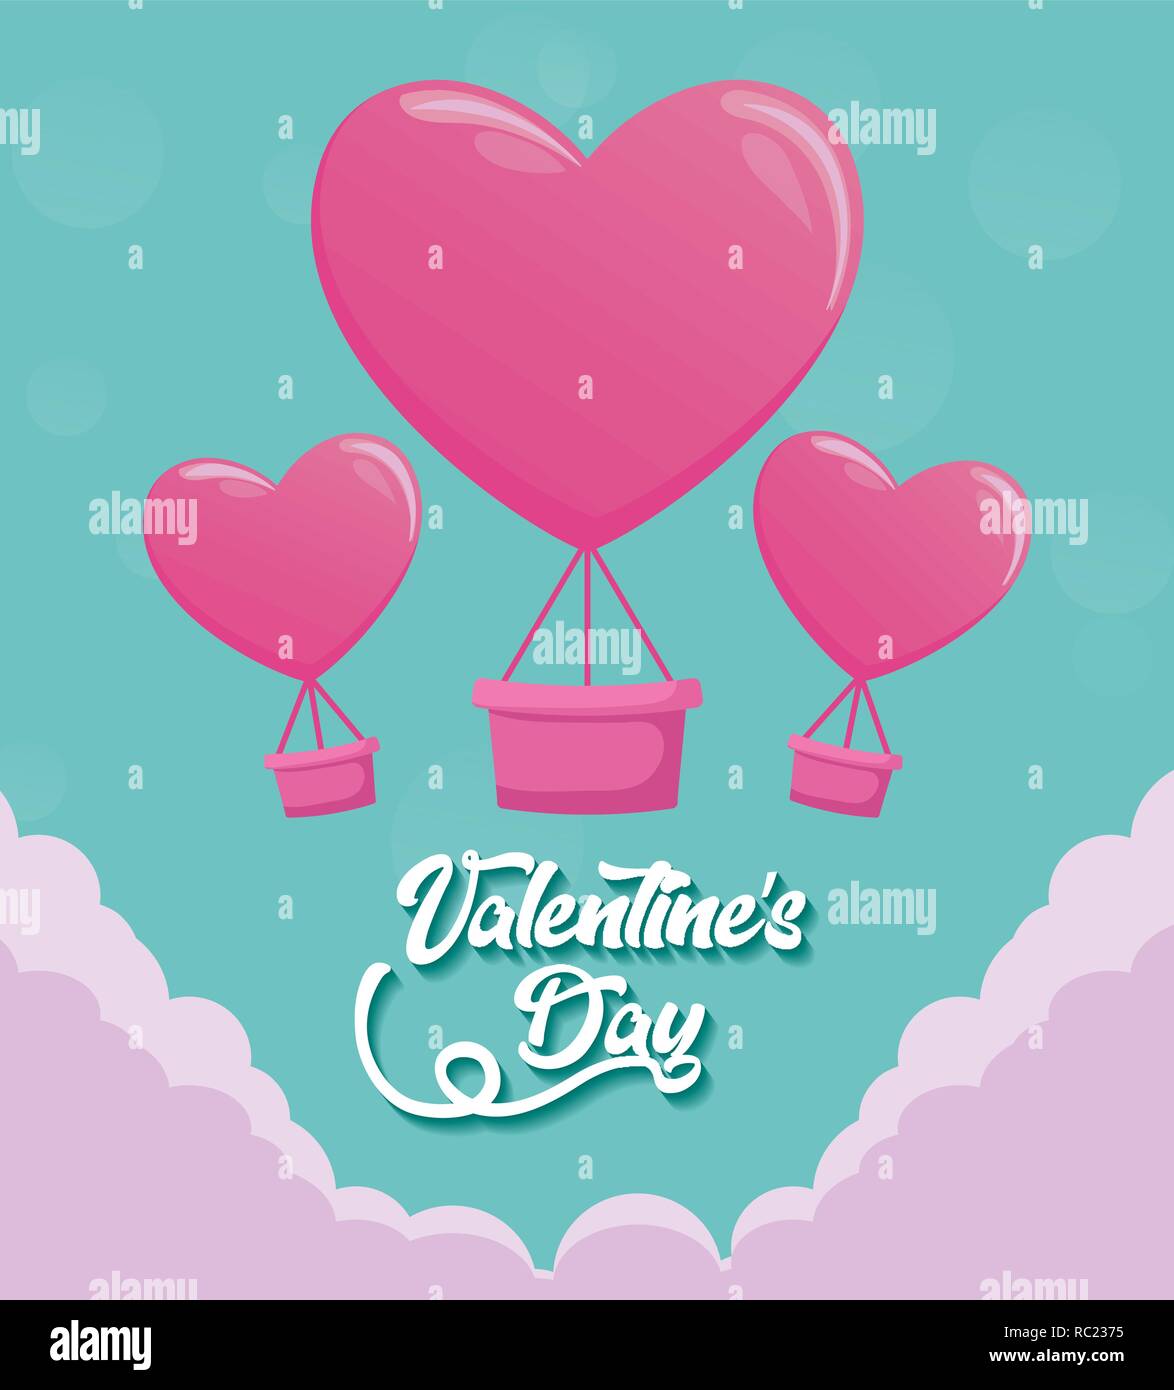 valentines day card with balloons air hot vector illustration design Stock Vector